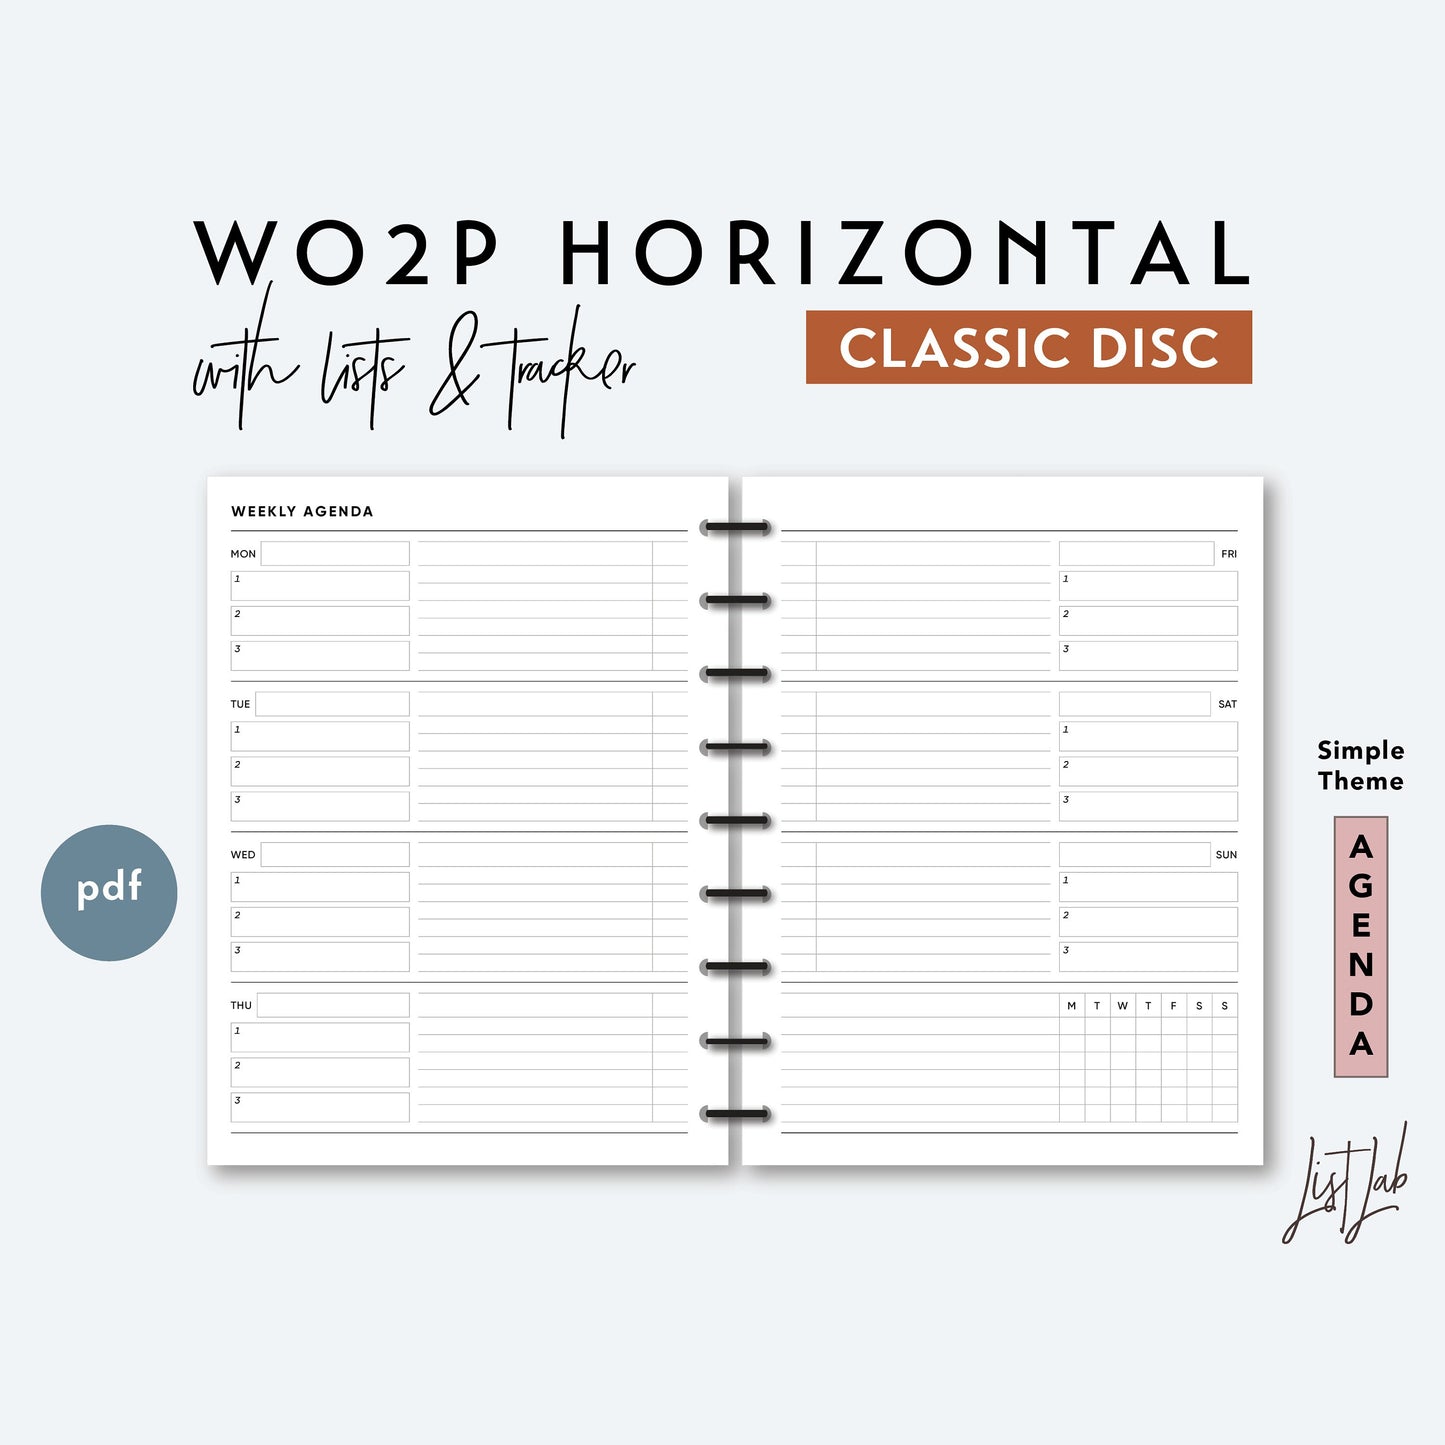 Classic Discbound WO2P HORIZONTAL - with Lists and Tracker Printable Insert Set